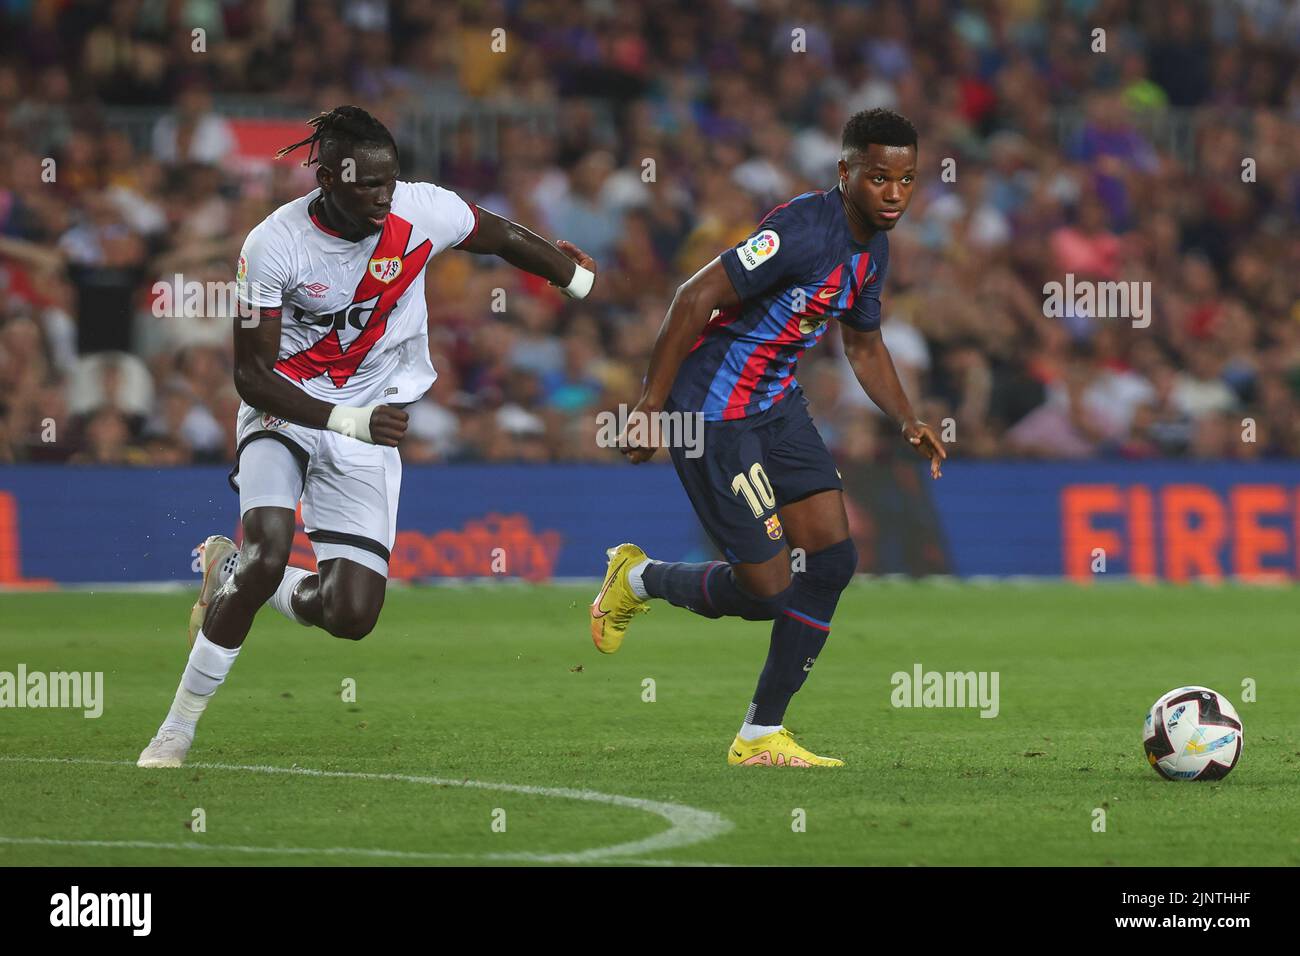 Ansu Fati of FC Barcelona in action during the Liga match between FC Barcelona and Rayo Vallecano at Spotify Camp Nou in Barcelona, Spain. Stock Photo